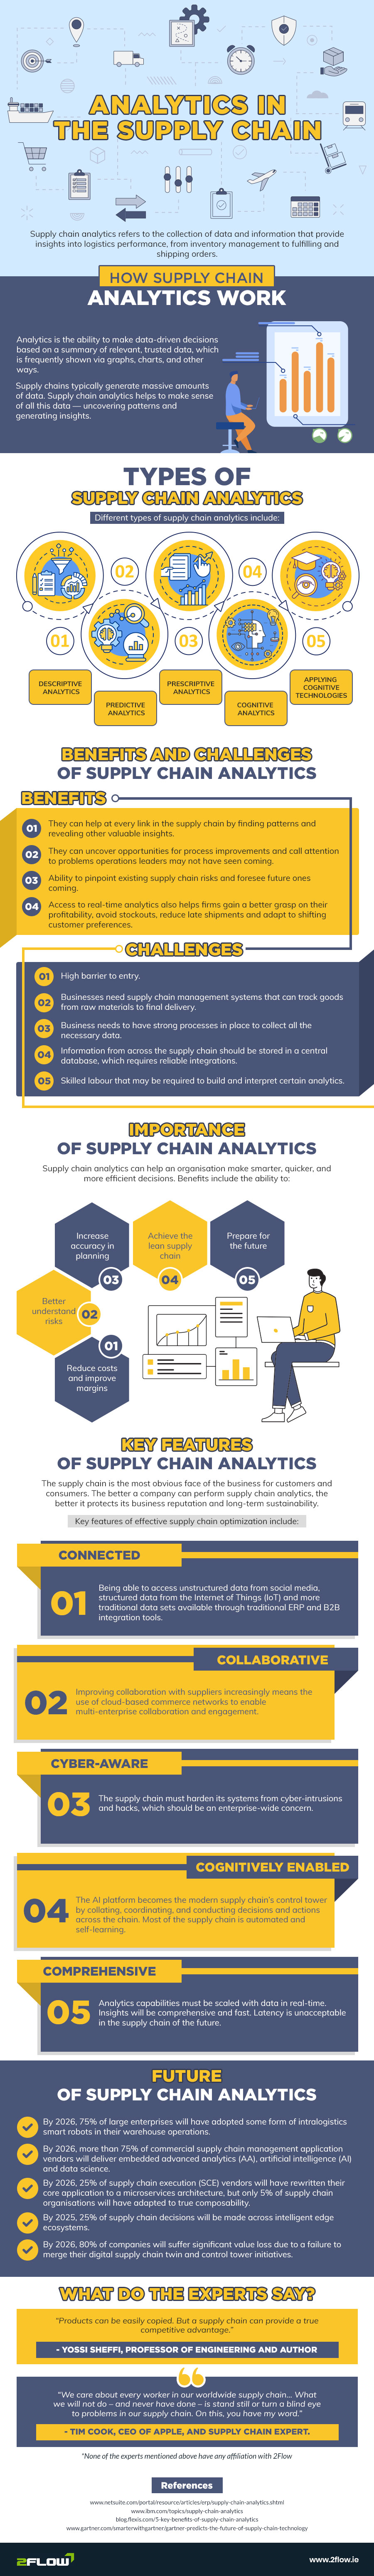 2Flow visual on the importance of analytics in the supply chain